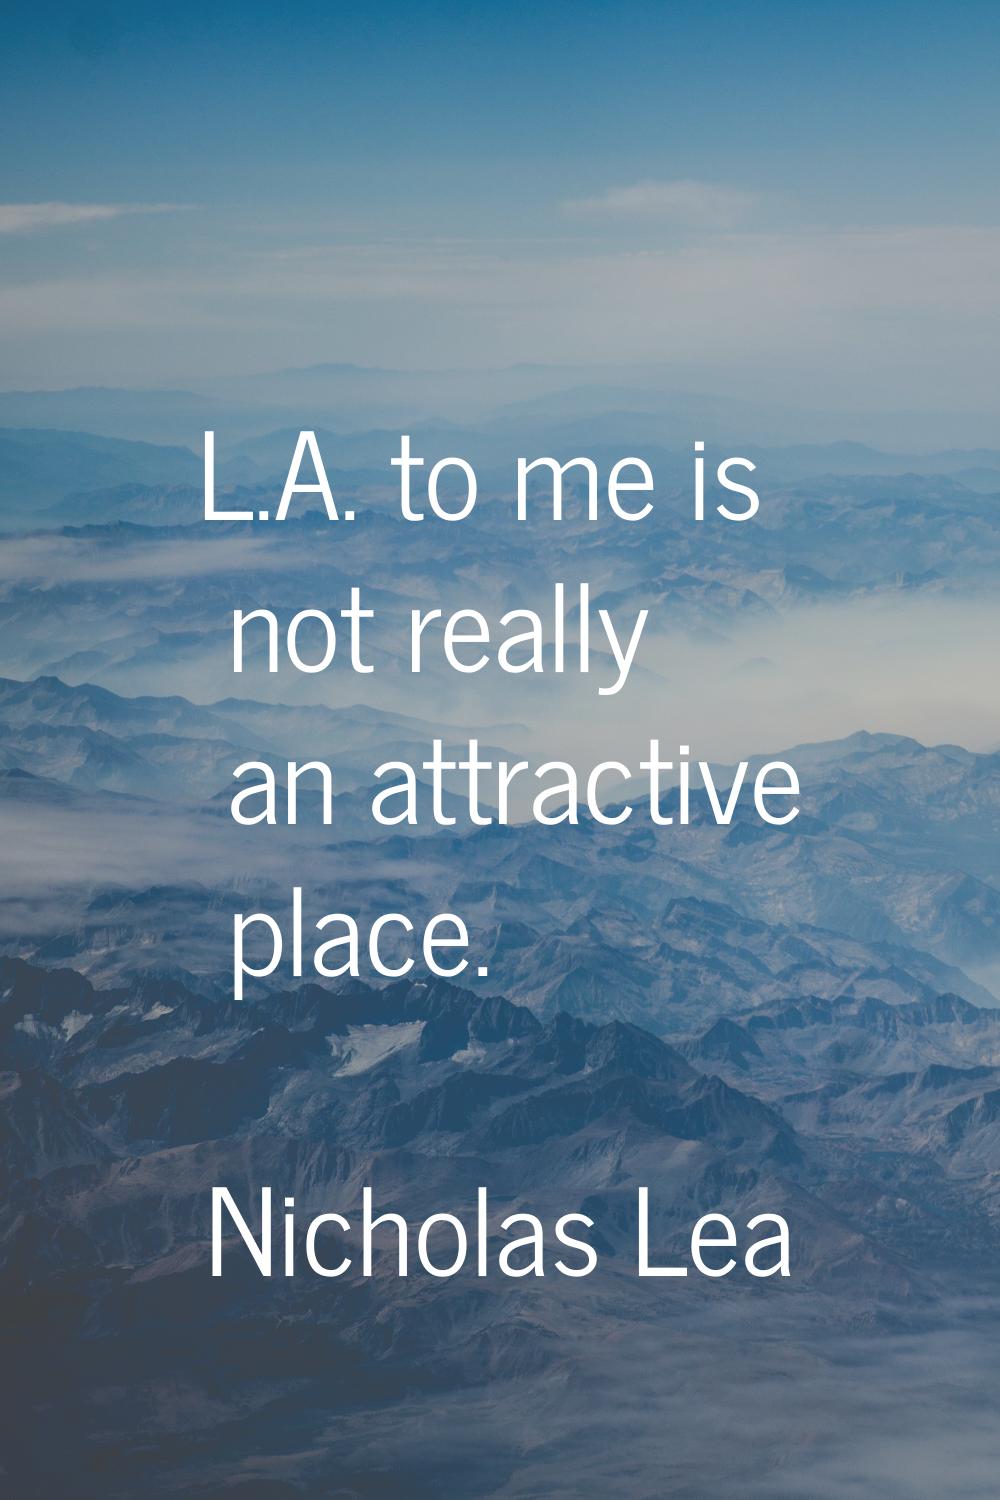 L.A. to me is not really an attractive place.